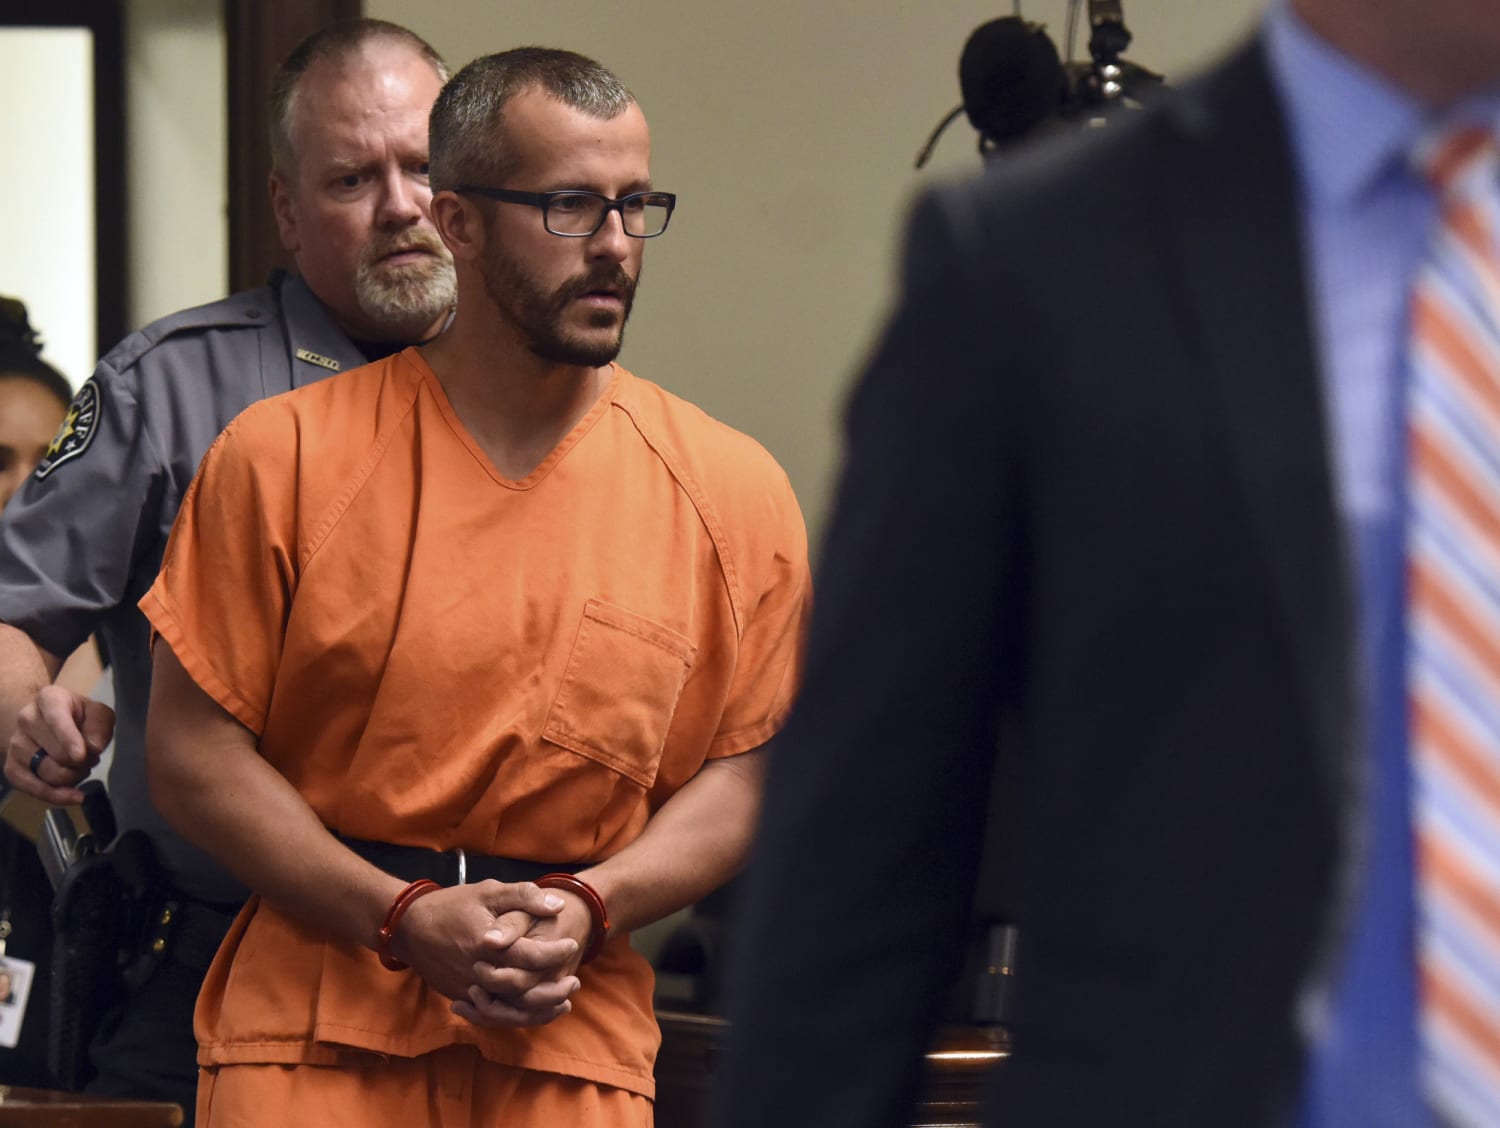 Chris Watts case investigators are still reeling: 'How does this happen?'